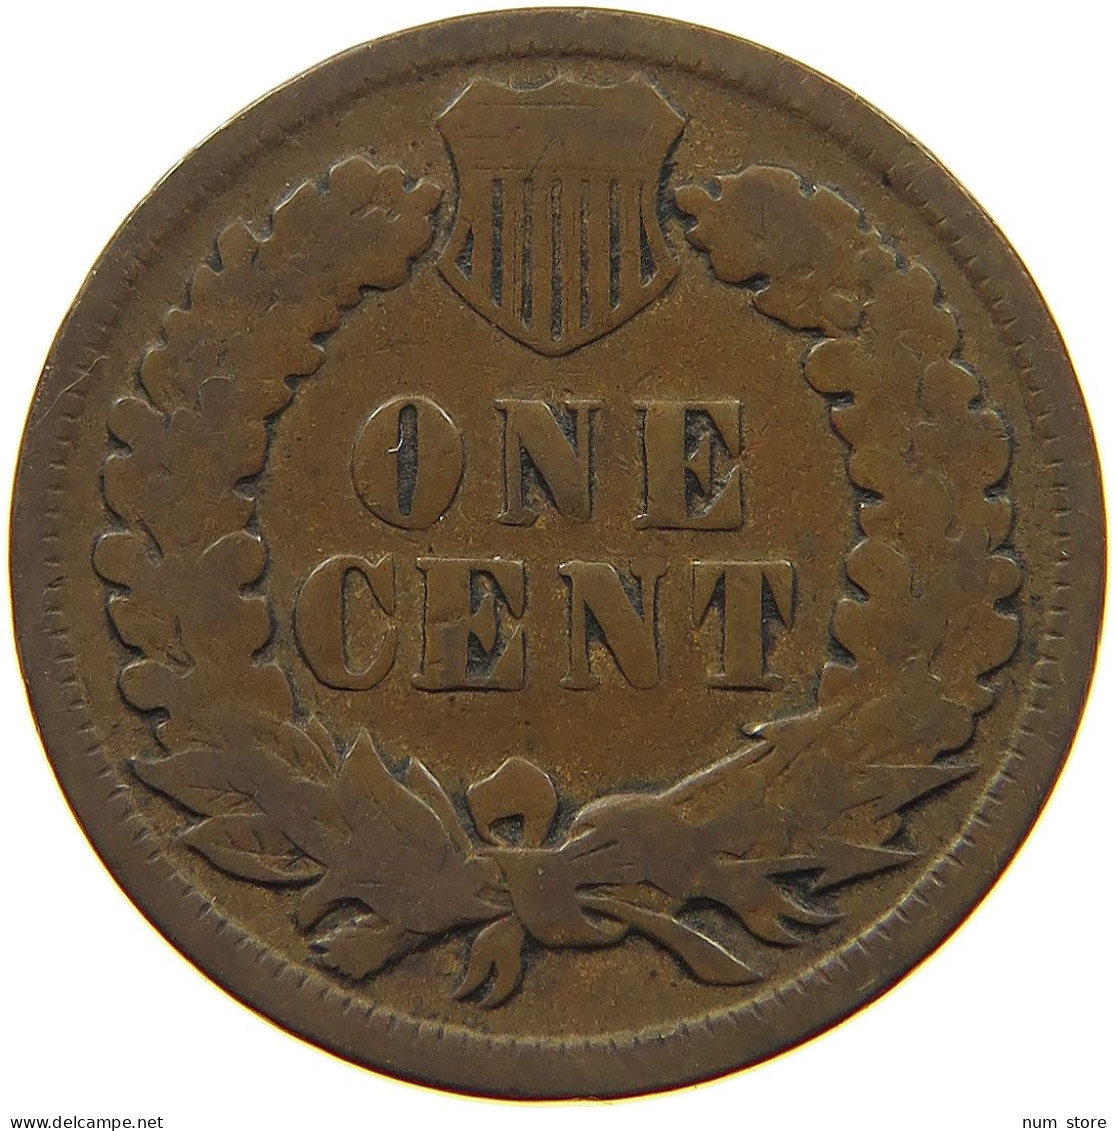 UNITED STATES OF AMERICA CENT 1895 INDIAN HEAD #s063 0397 - 1859-1909: Indian Head